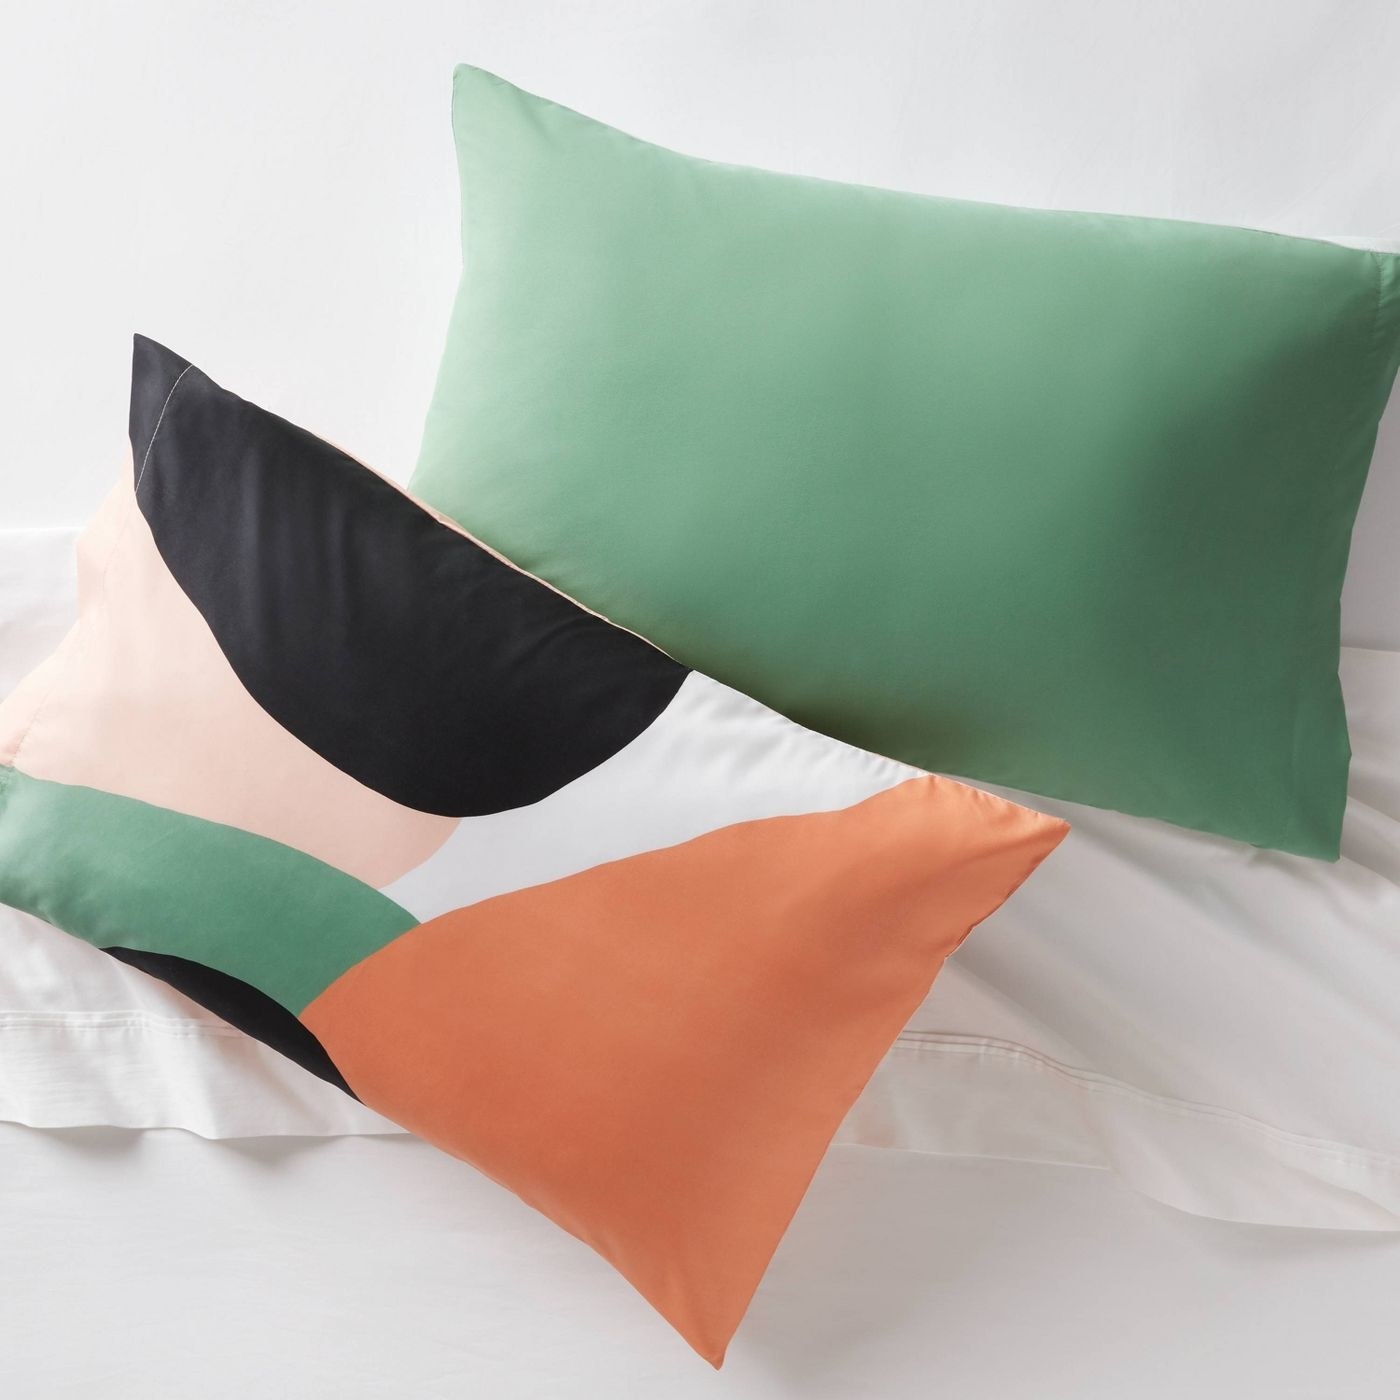 A green pillow and a pillow with orange, green, pink and black blobs